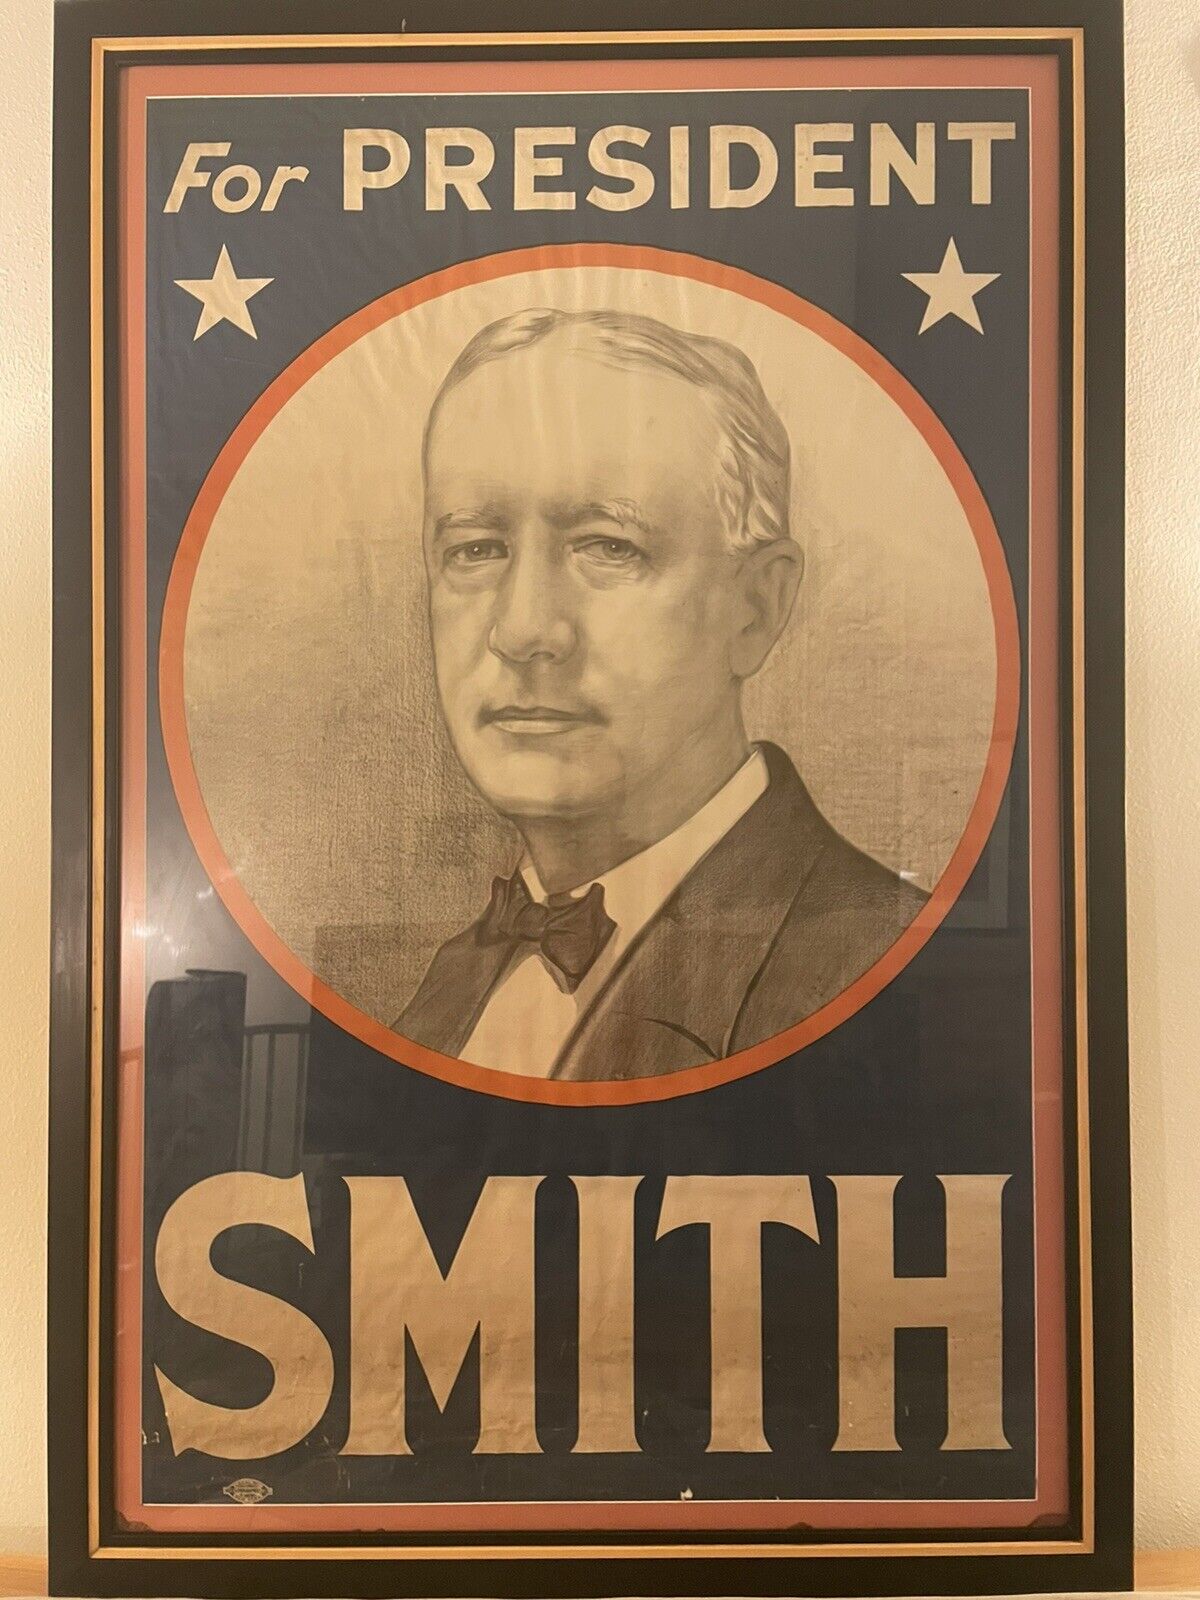 vintage rare 1928 LARGE AL SMITH FOR PRESIDENT CAMPAIGN POSTER 60”x40”